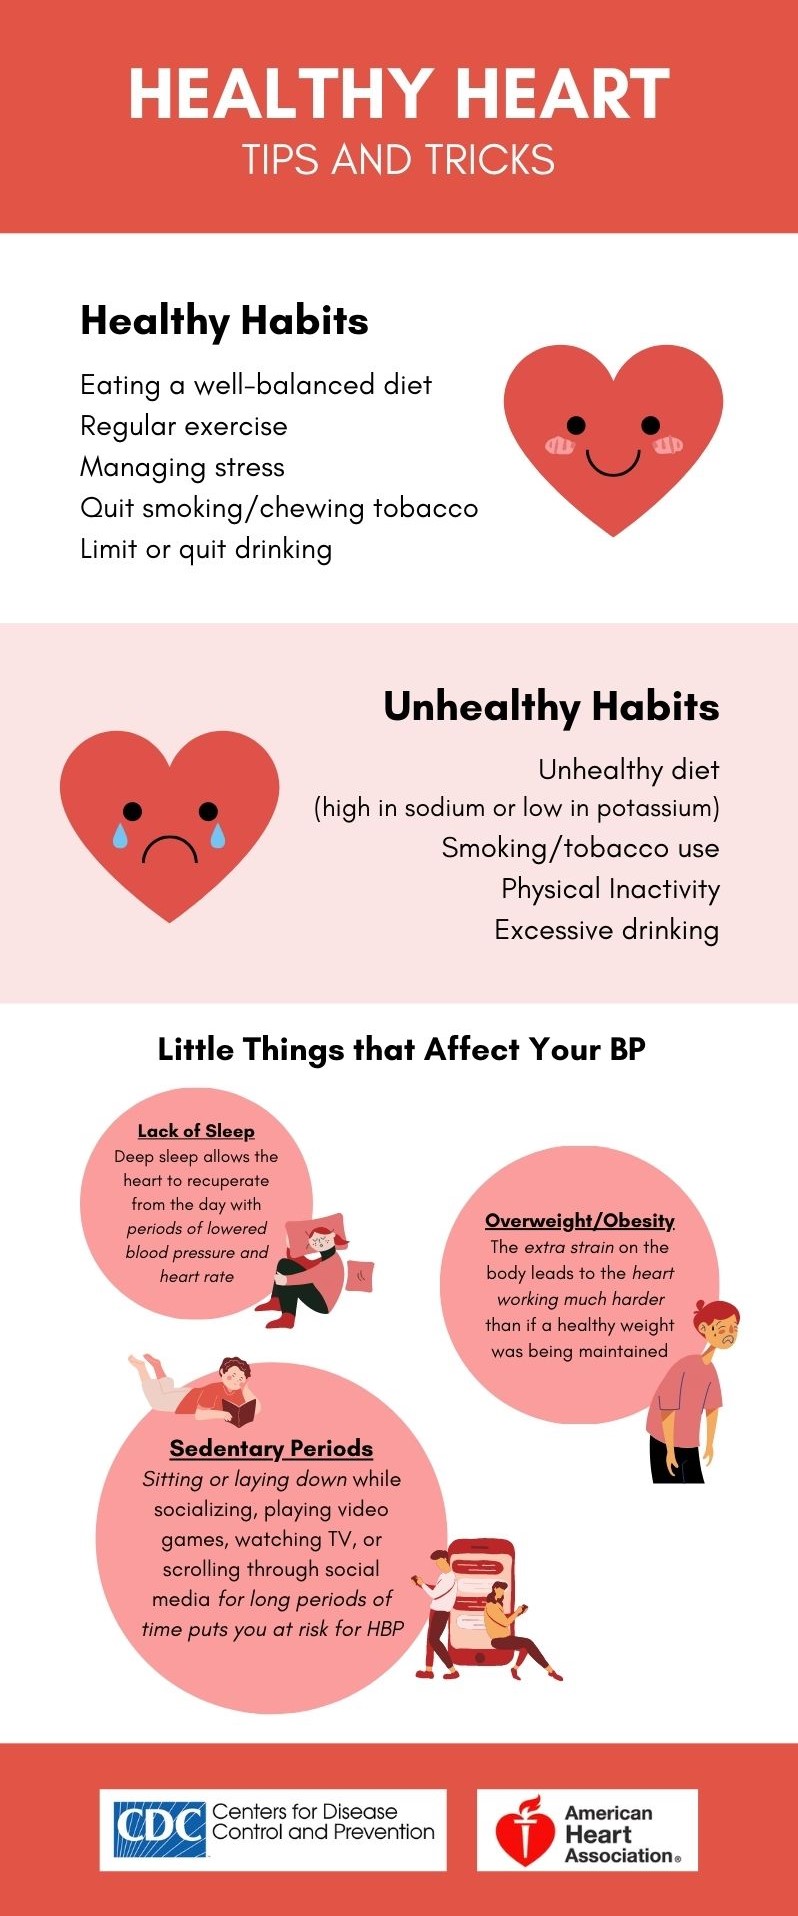 Heart-healthy strategies for BP control